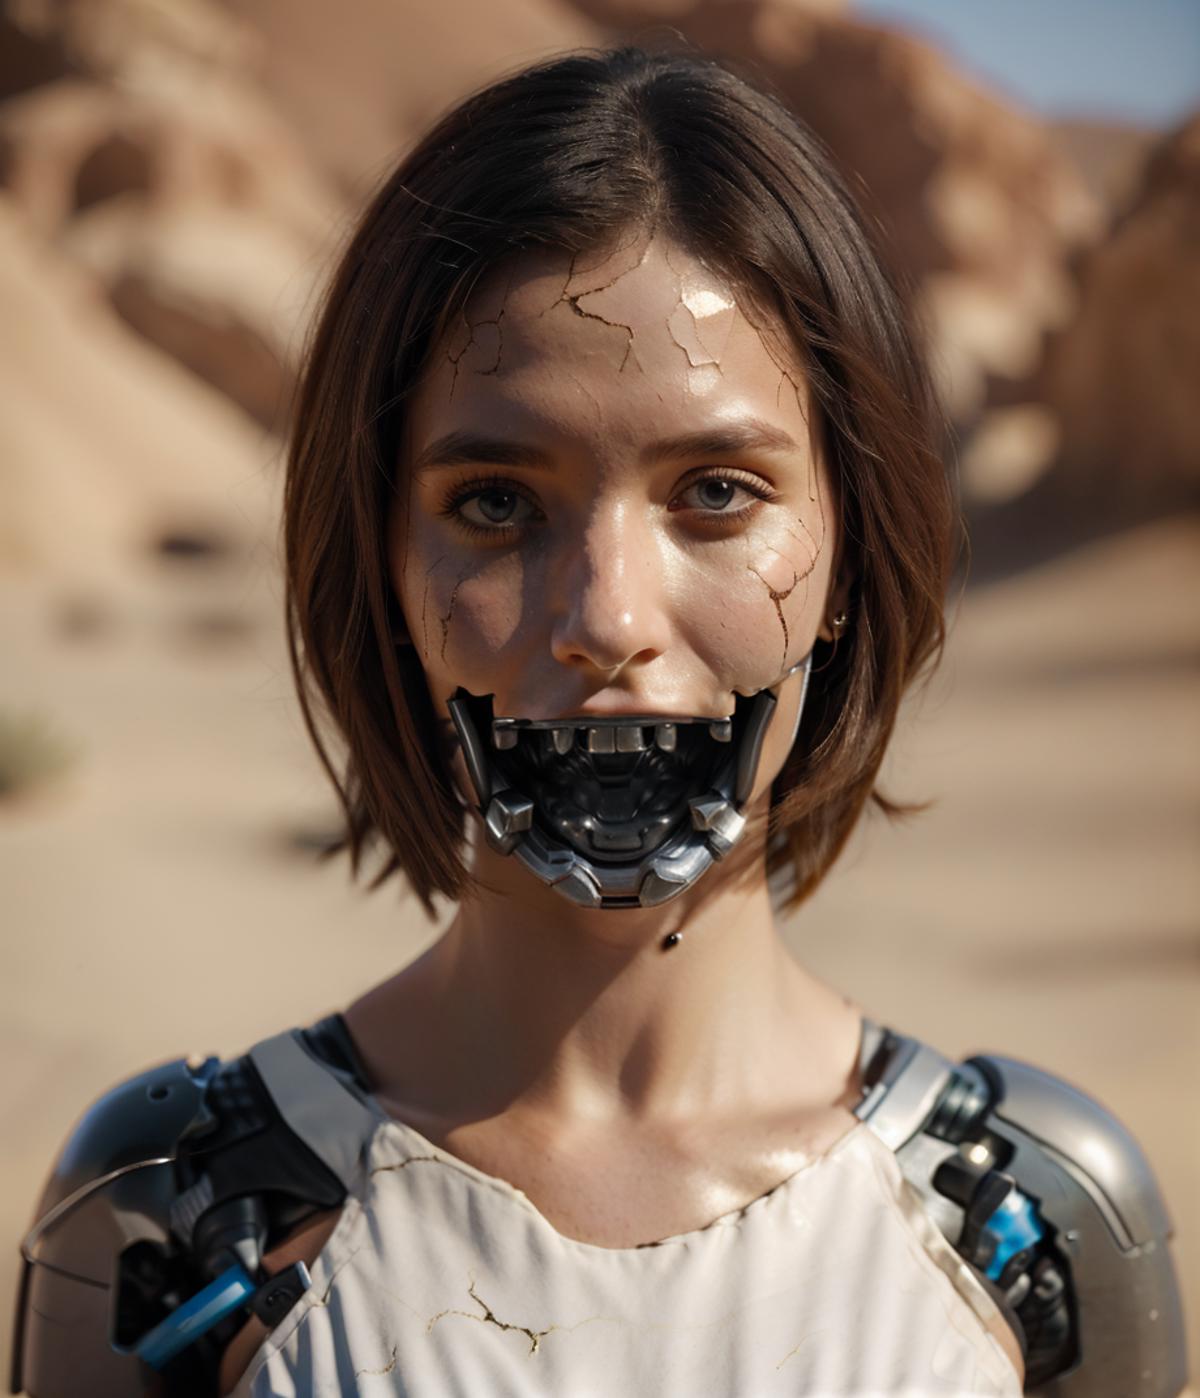 A woman with a unique metallic appearance, possibly with a cyborg-like mouth and face, is standing near a desert landscape.